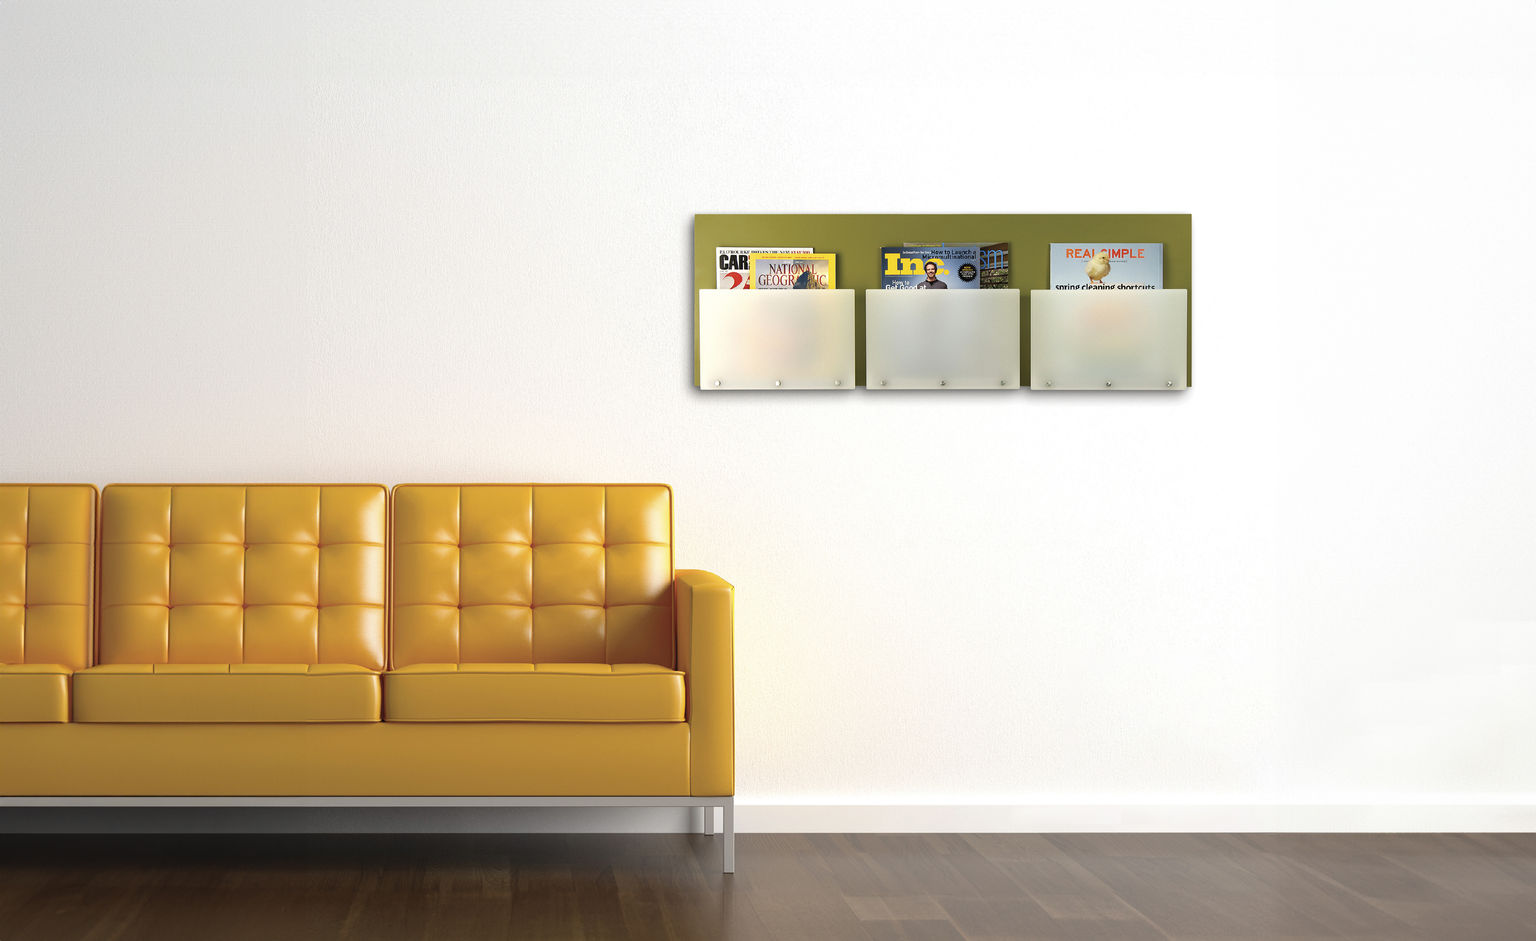 A waiting area with a yellow leather couch and a custom wall organizer holding magazines.